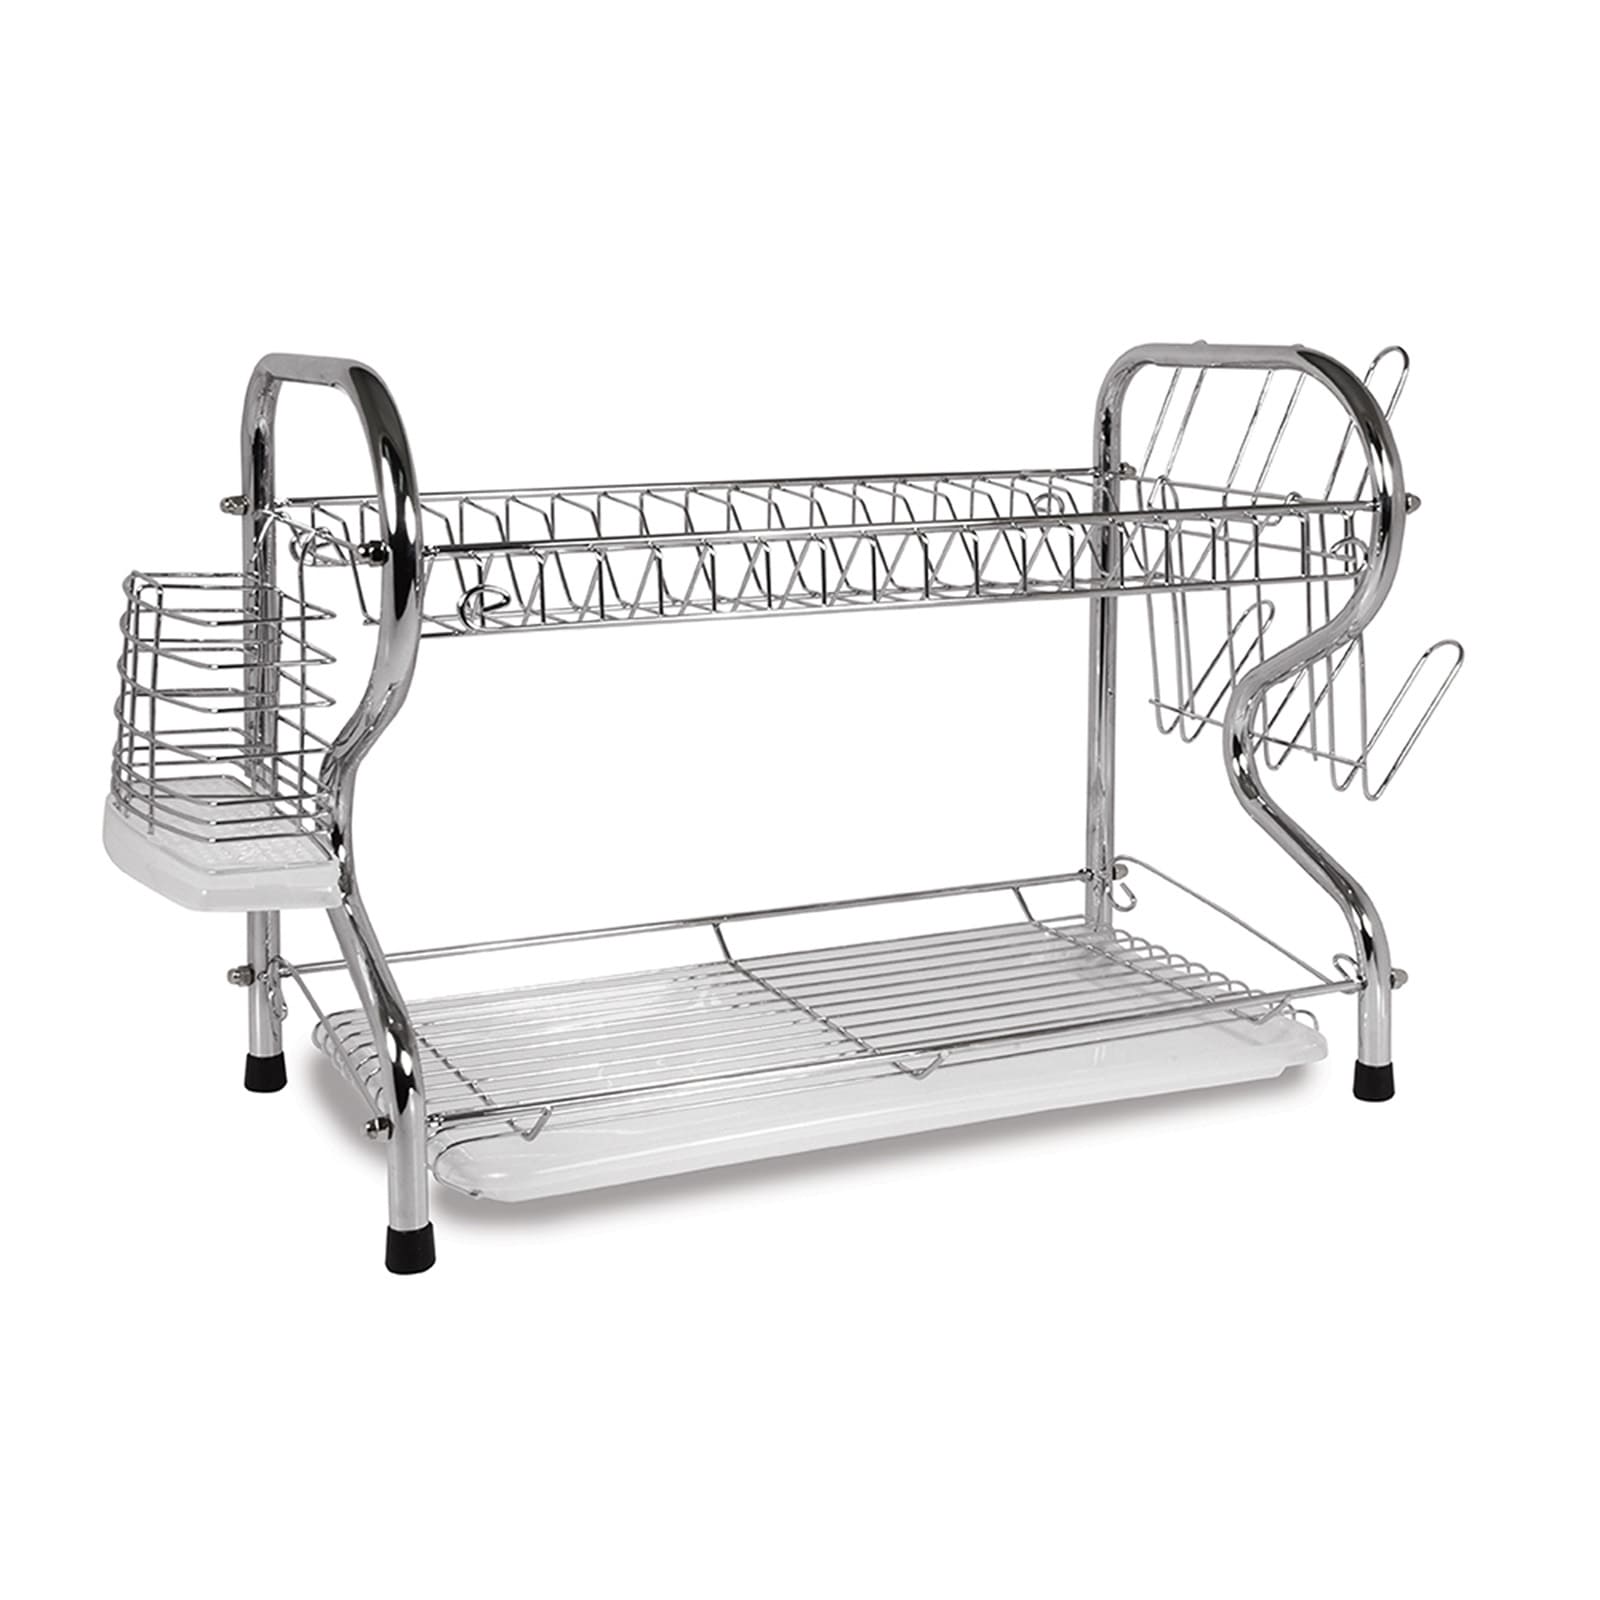 https://ak1.ostkcdn.com/images/products/is/images/direct/3cf7657fa5b80d392910d19b6ccdf1e8043b1905/Better-Chef-16-inch-2-Level-Dish-Rack.jpg